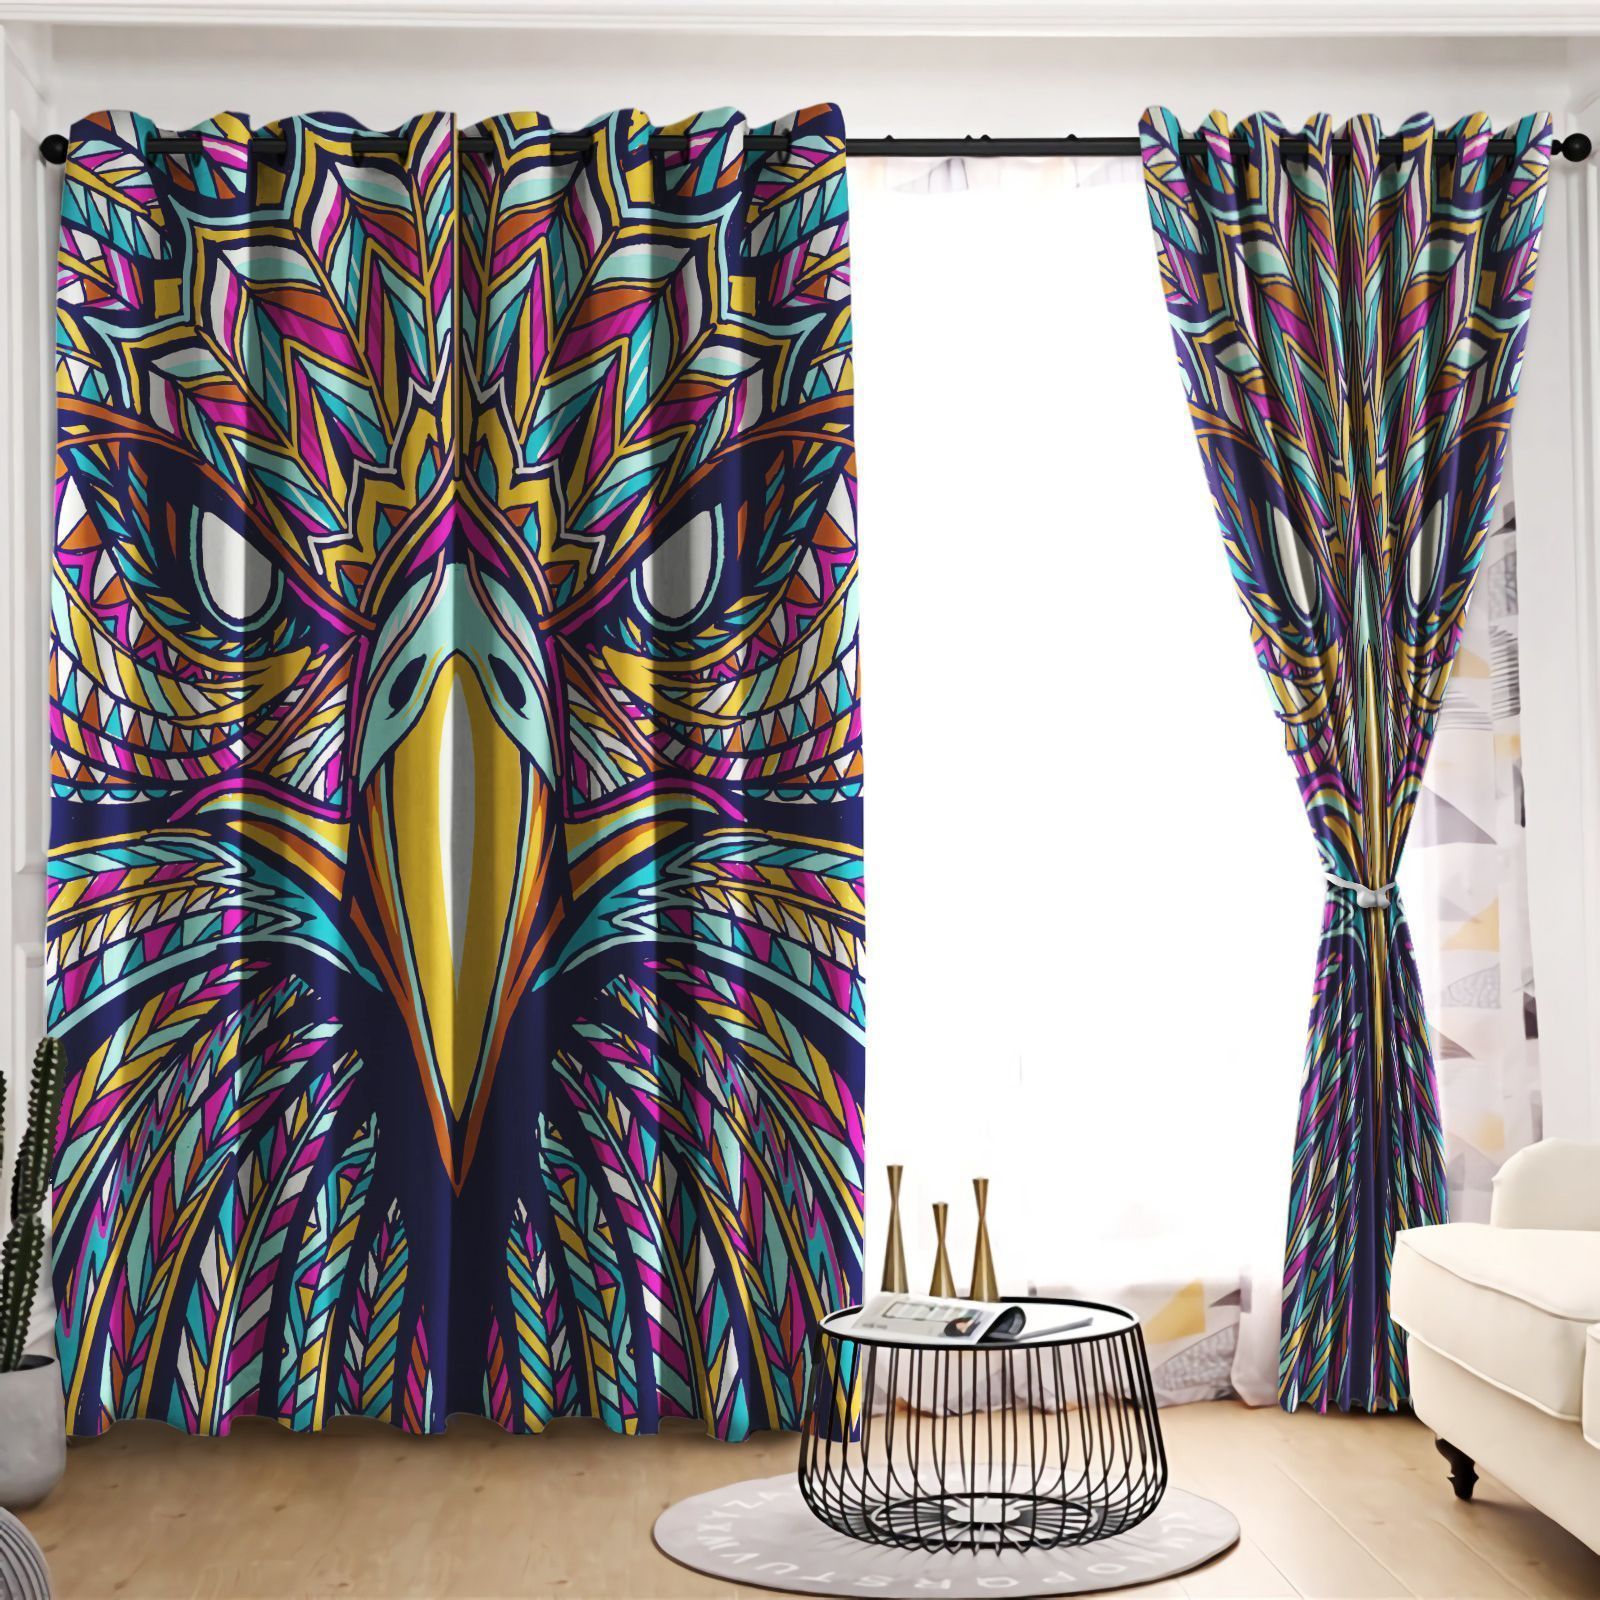 Appealing Eagle With Colorful Pattern Printed Window Curtains Home Decor